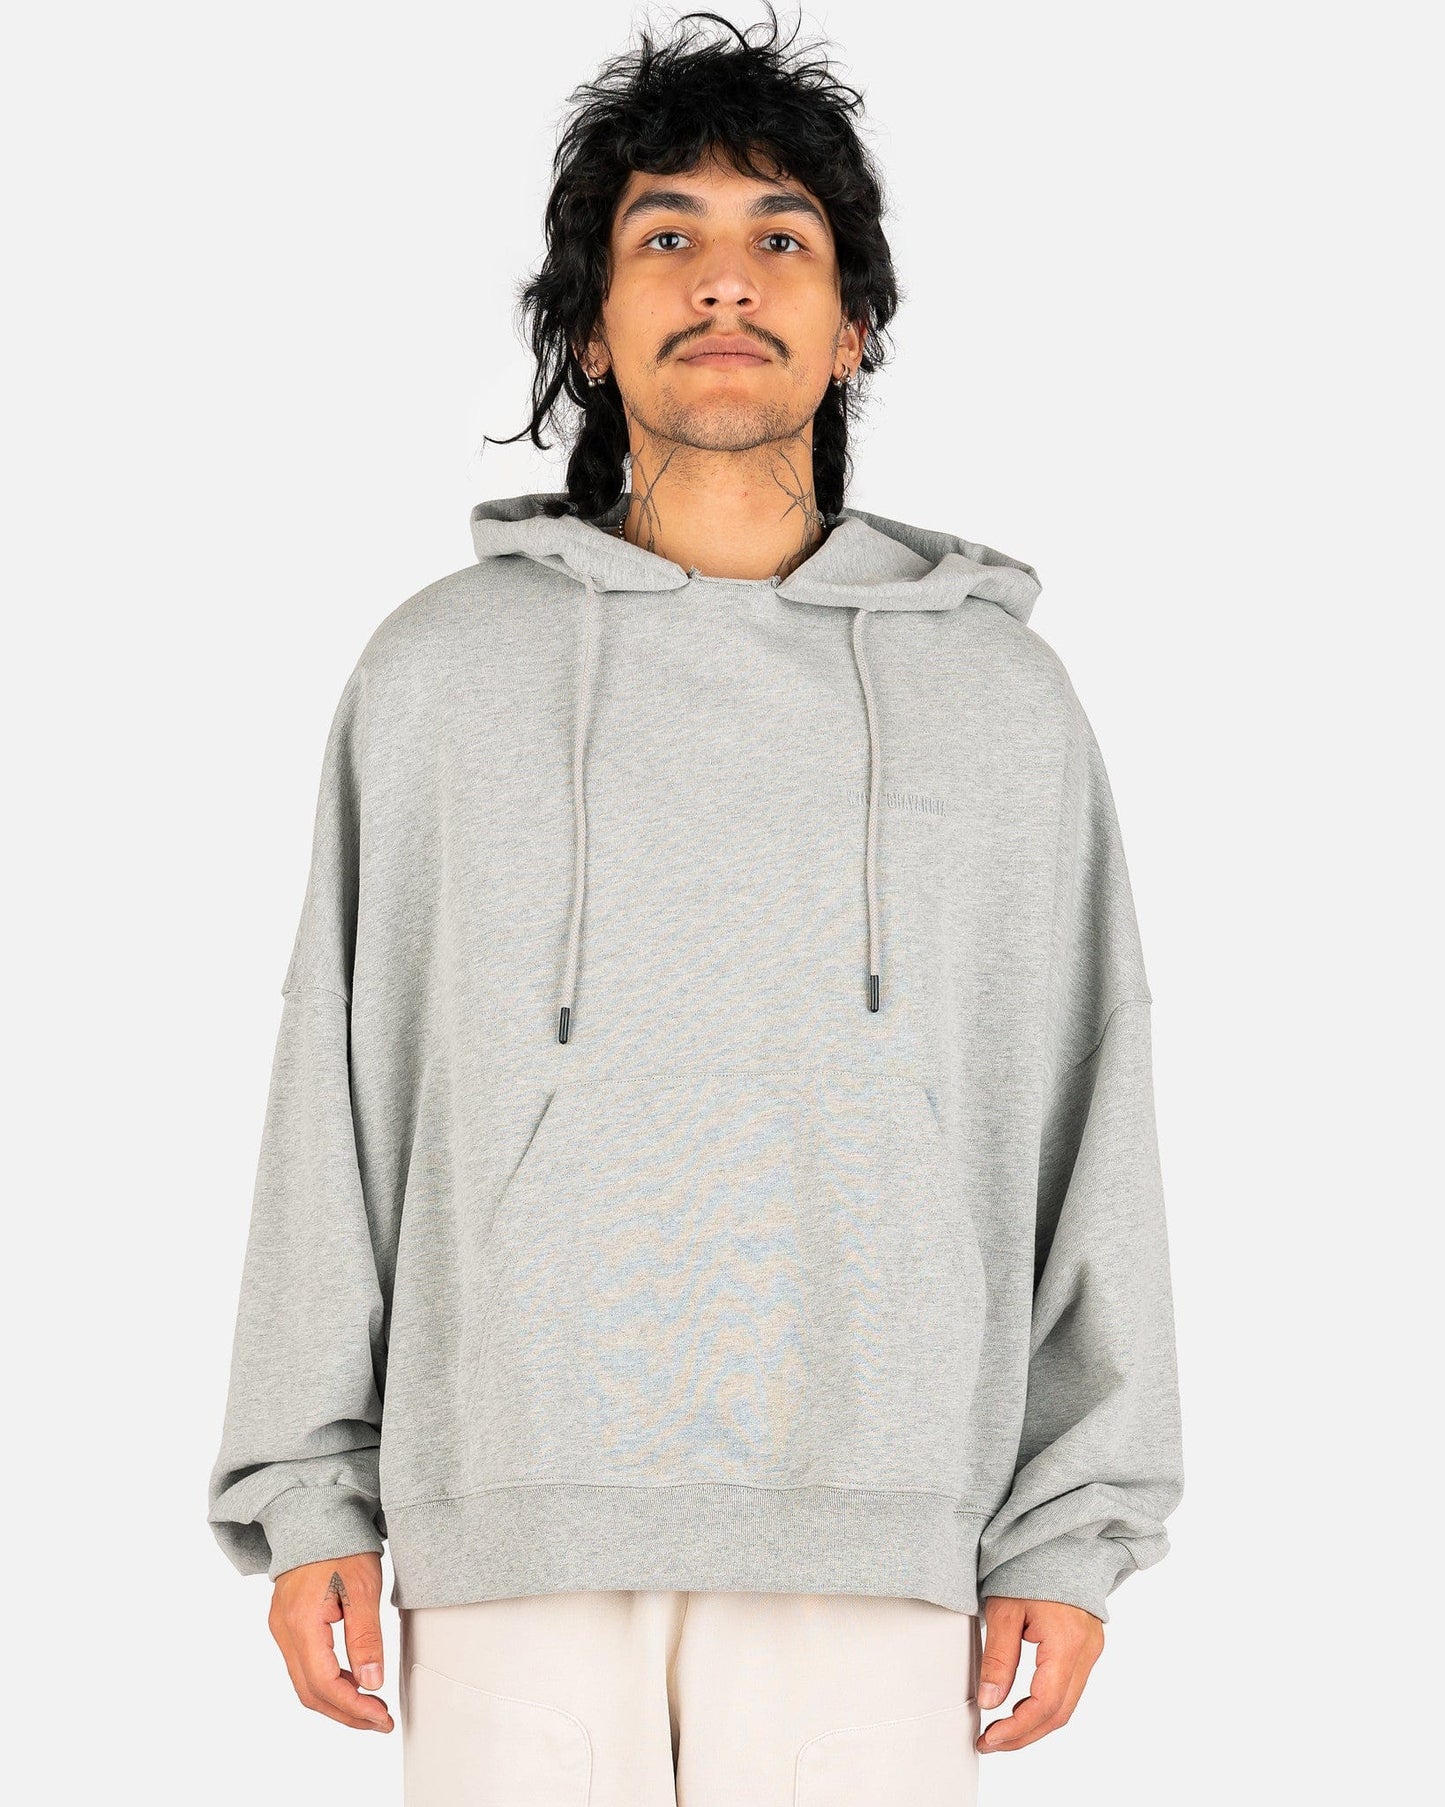 Willy Chavarria Ripped Neck Bomber Hoodie in Heather Grey